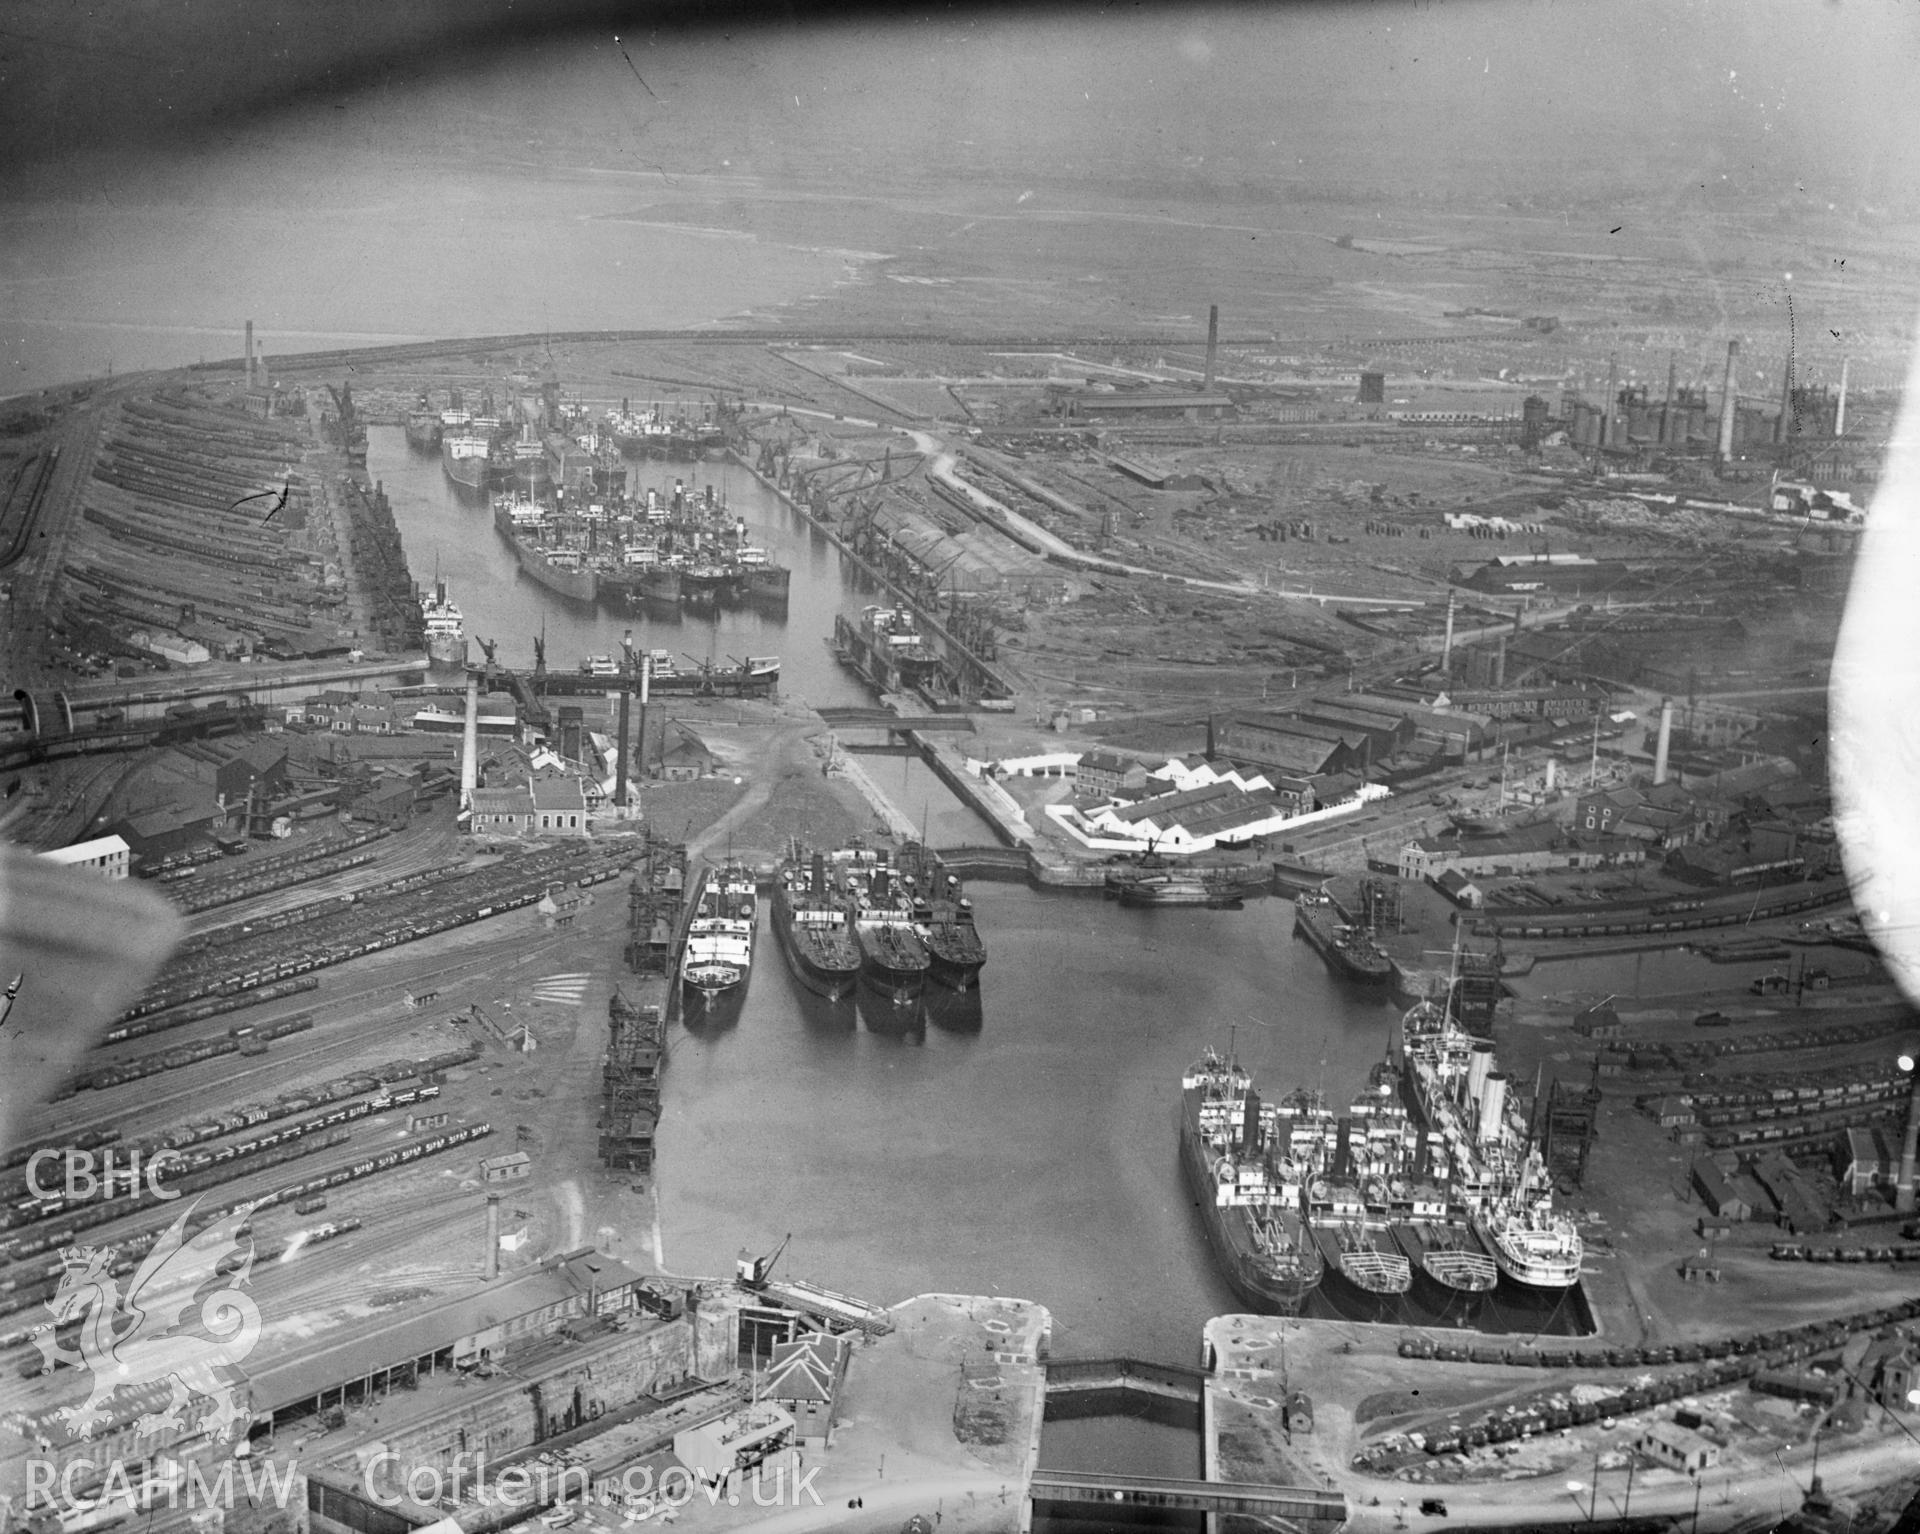 General view of Cardiff docks, oblique aerial view. 5?x4? black and white glass plate negative.